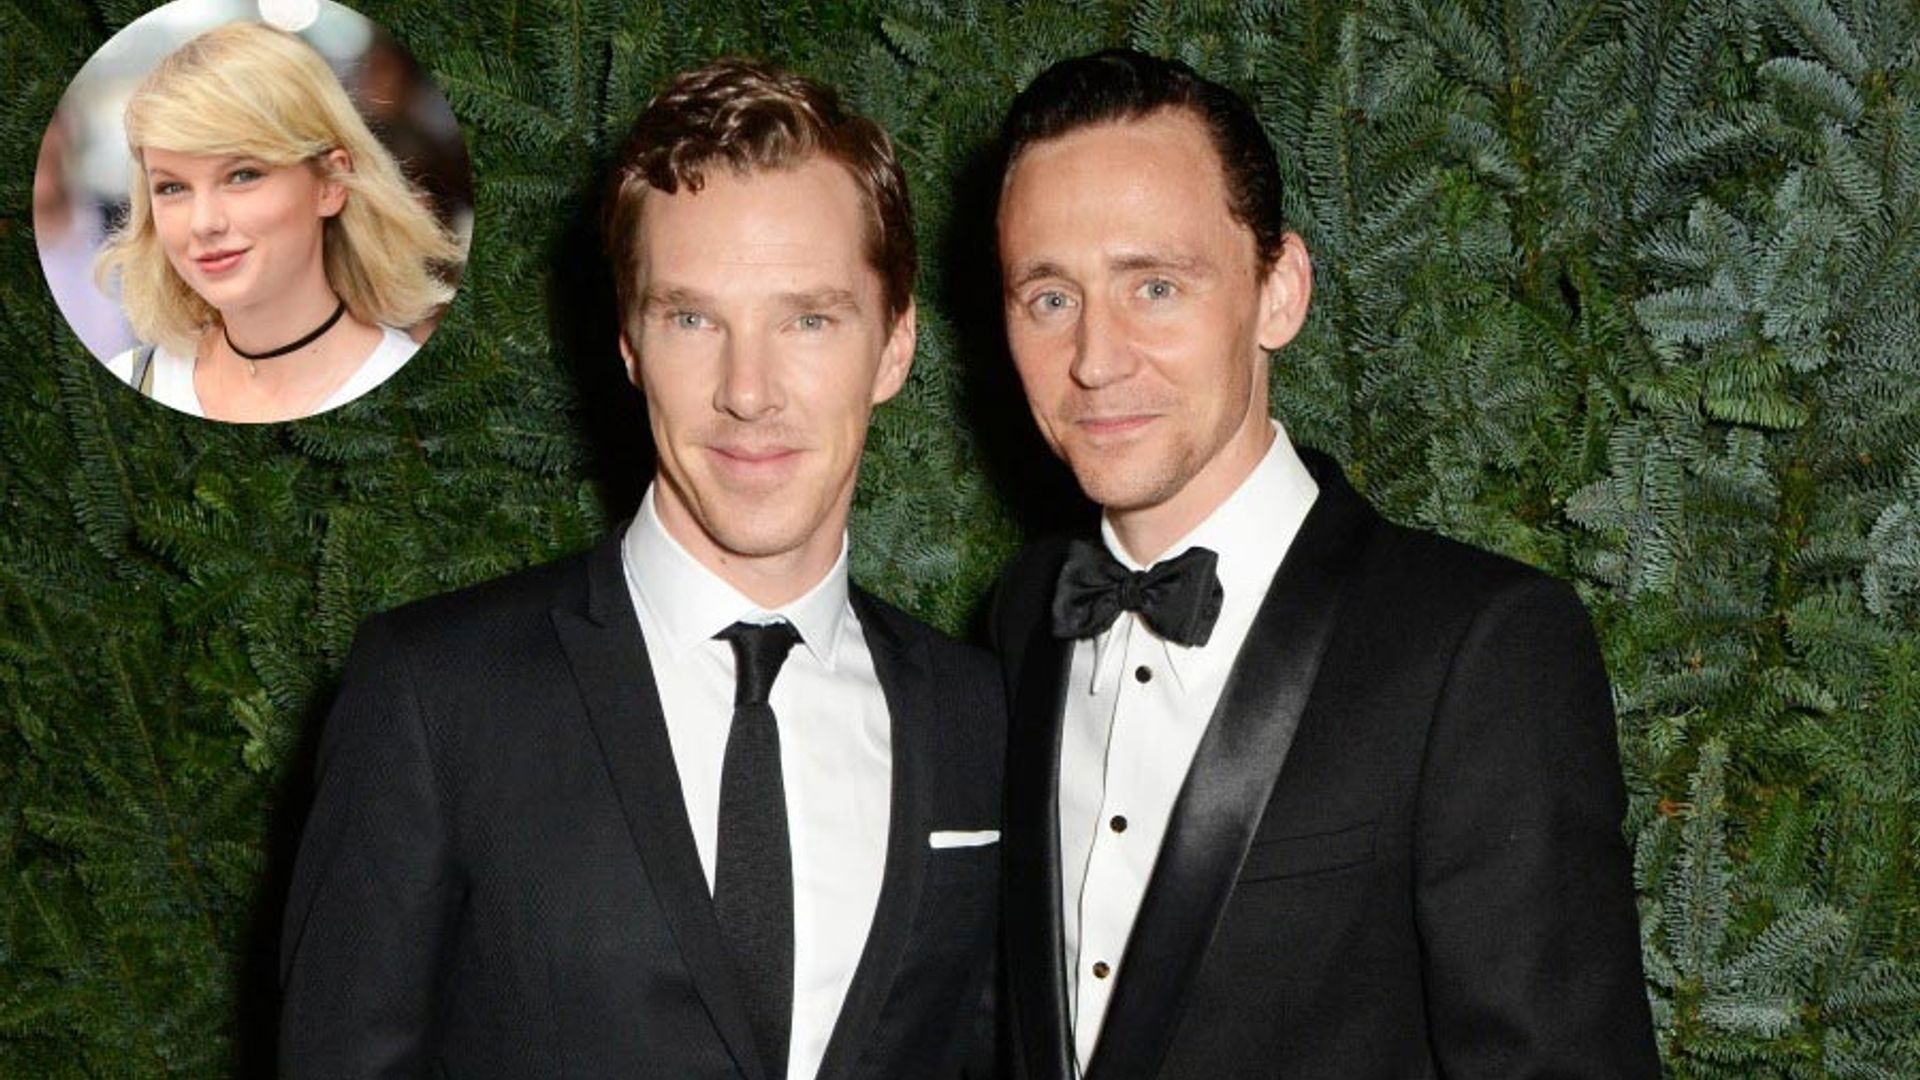 Tom Hiddleston can count on Benedict Cumberbatch to not ask about that 'certain someone'